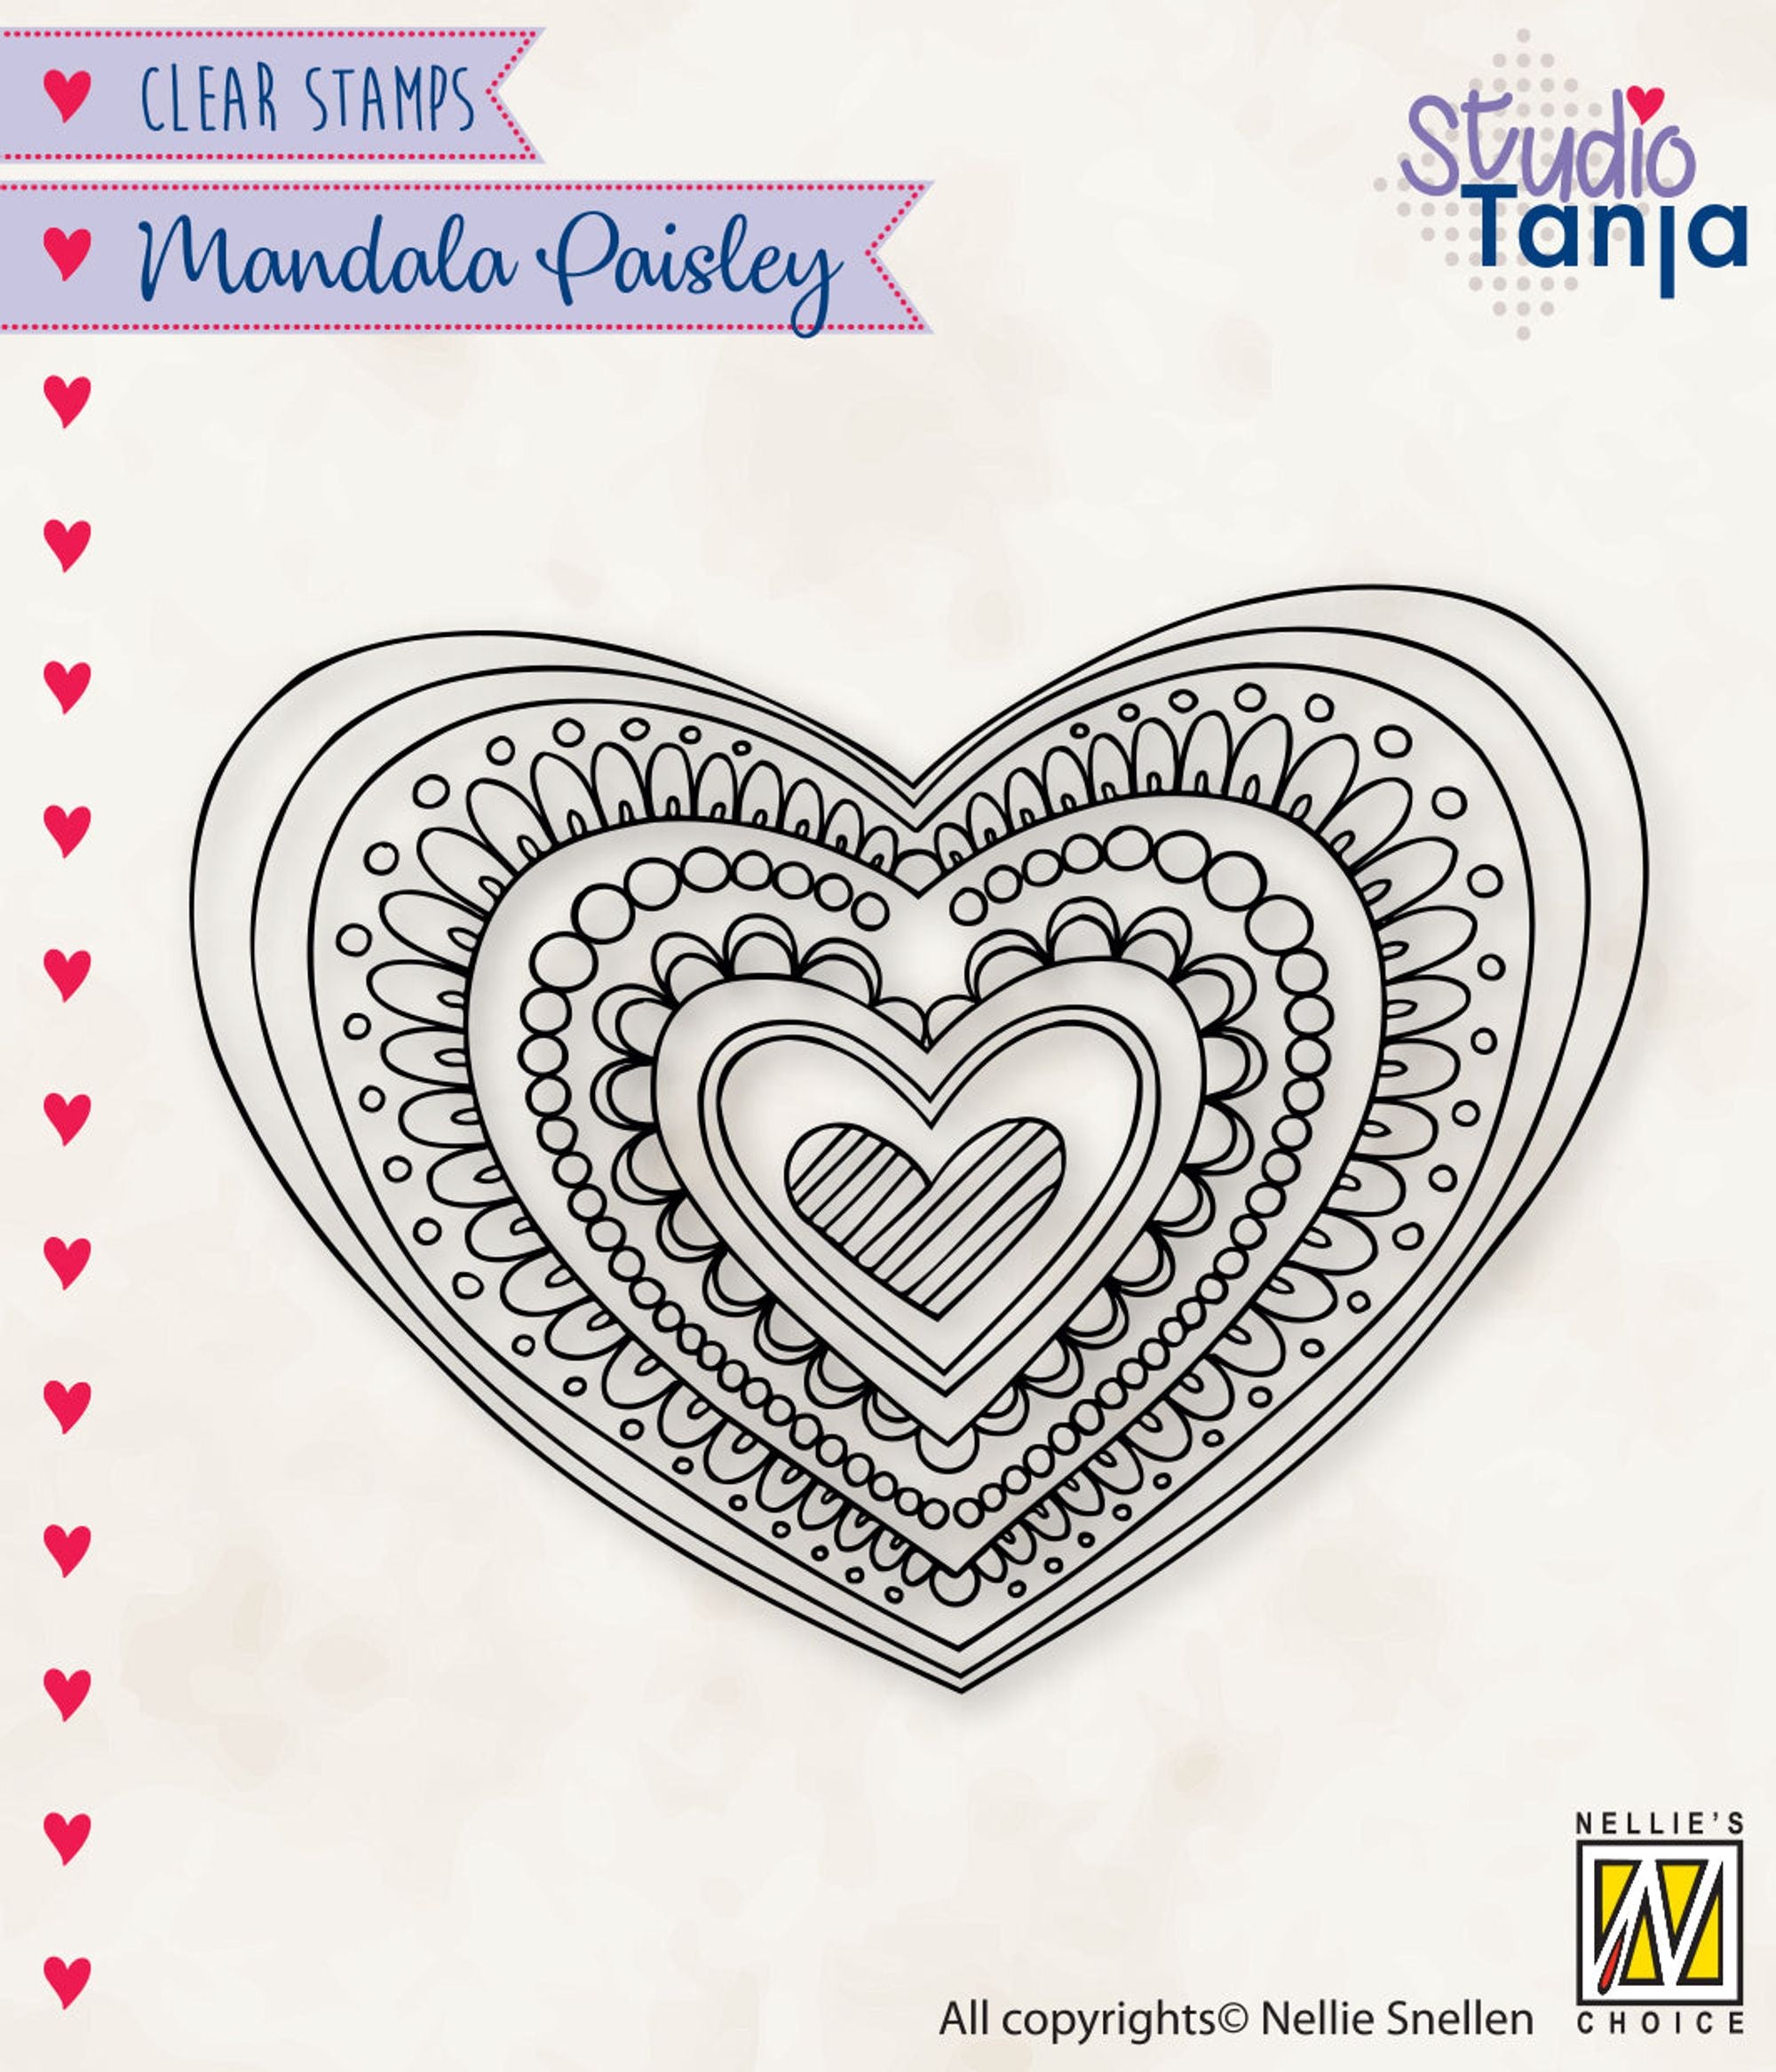 Nellie's Choice Clear Stamp Mandalas Paisley Heart